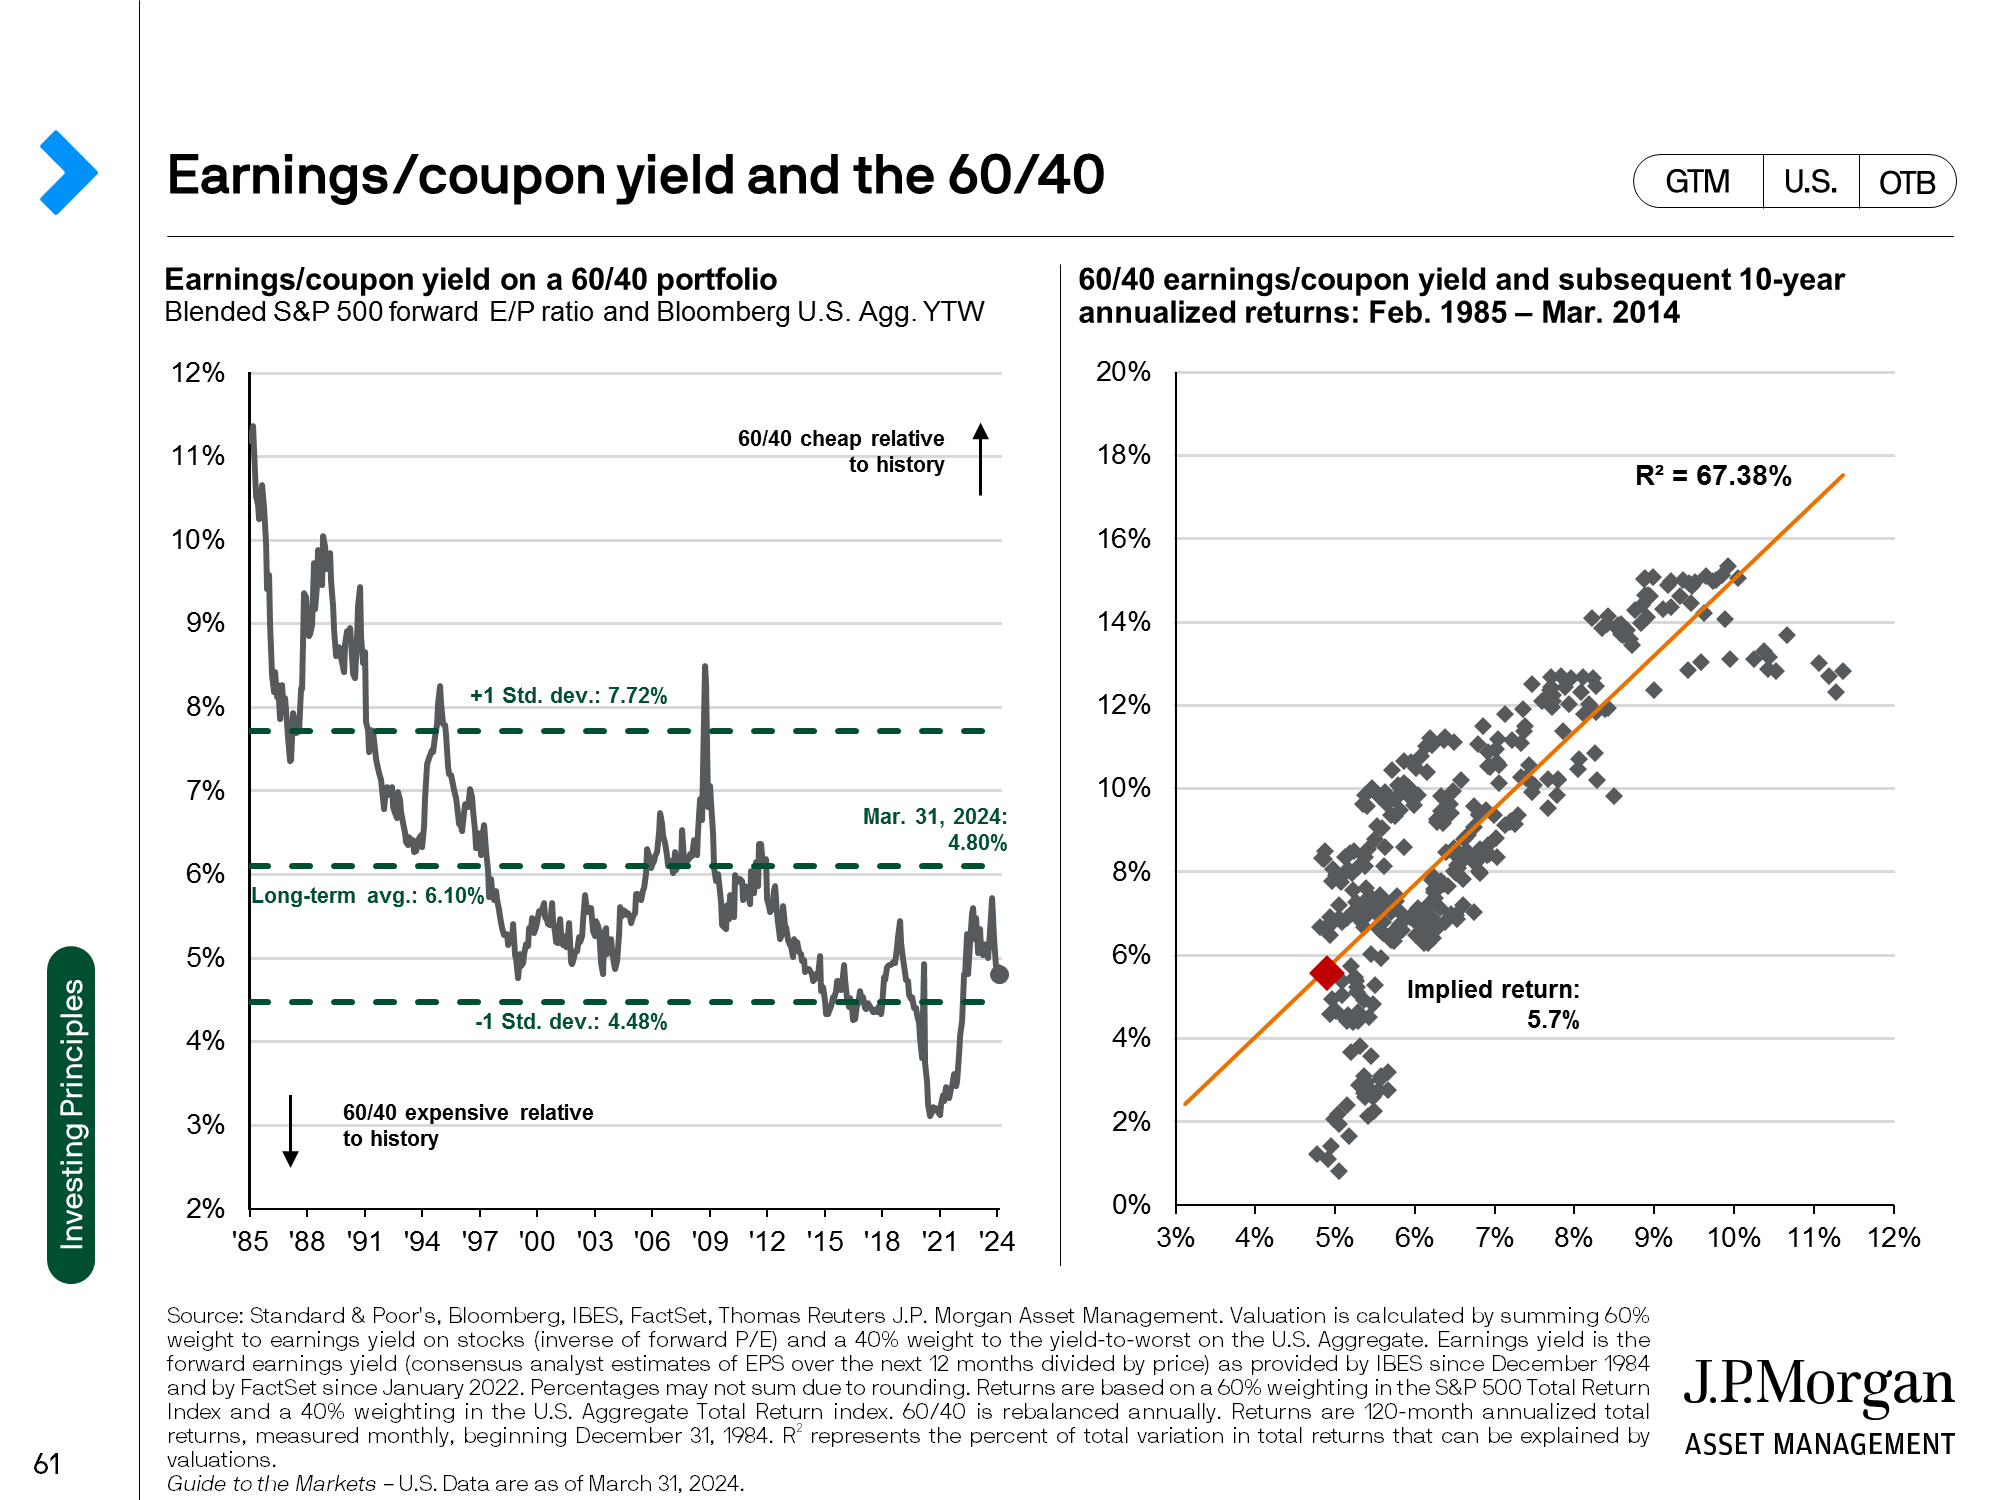 Yield alternatives: Domestic and global